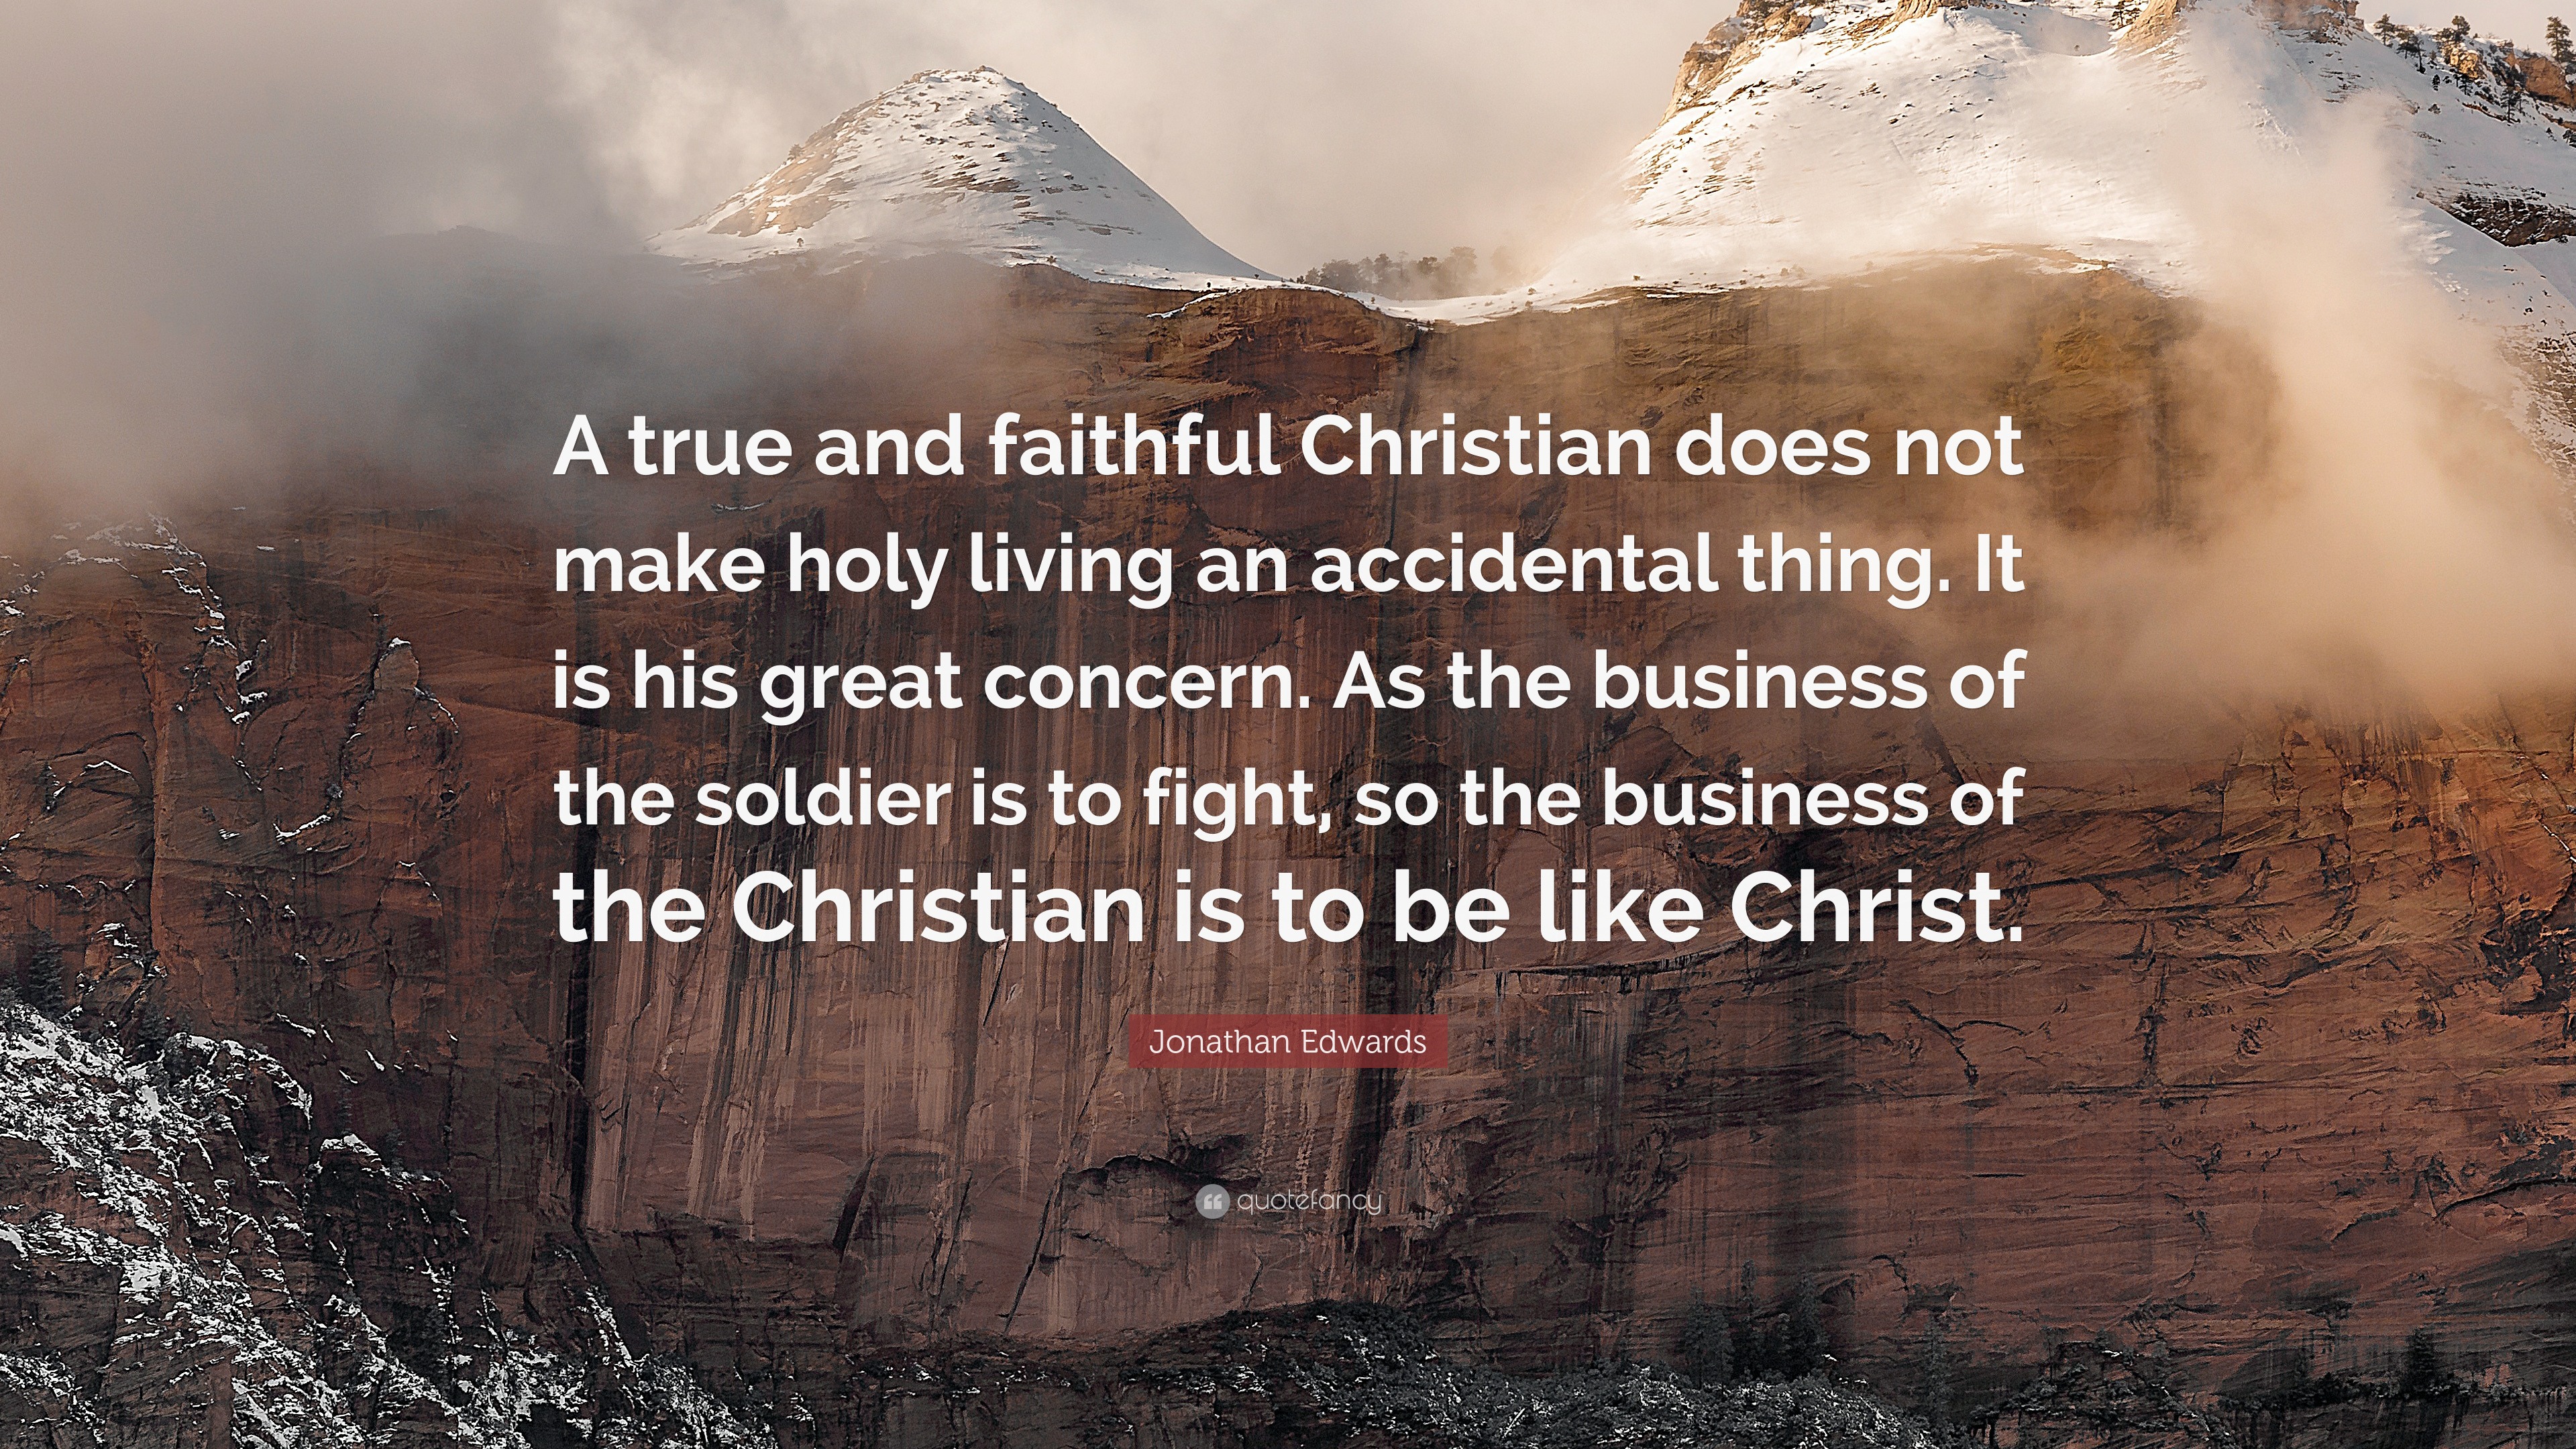 Jonathan Edwards Quote: “A true and faithful Christian does not make